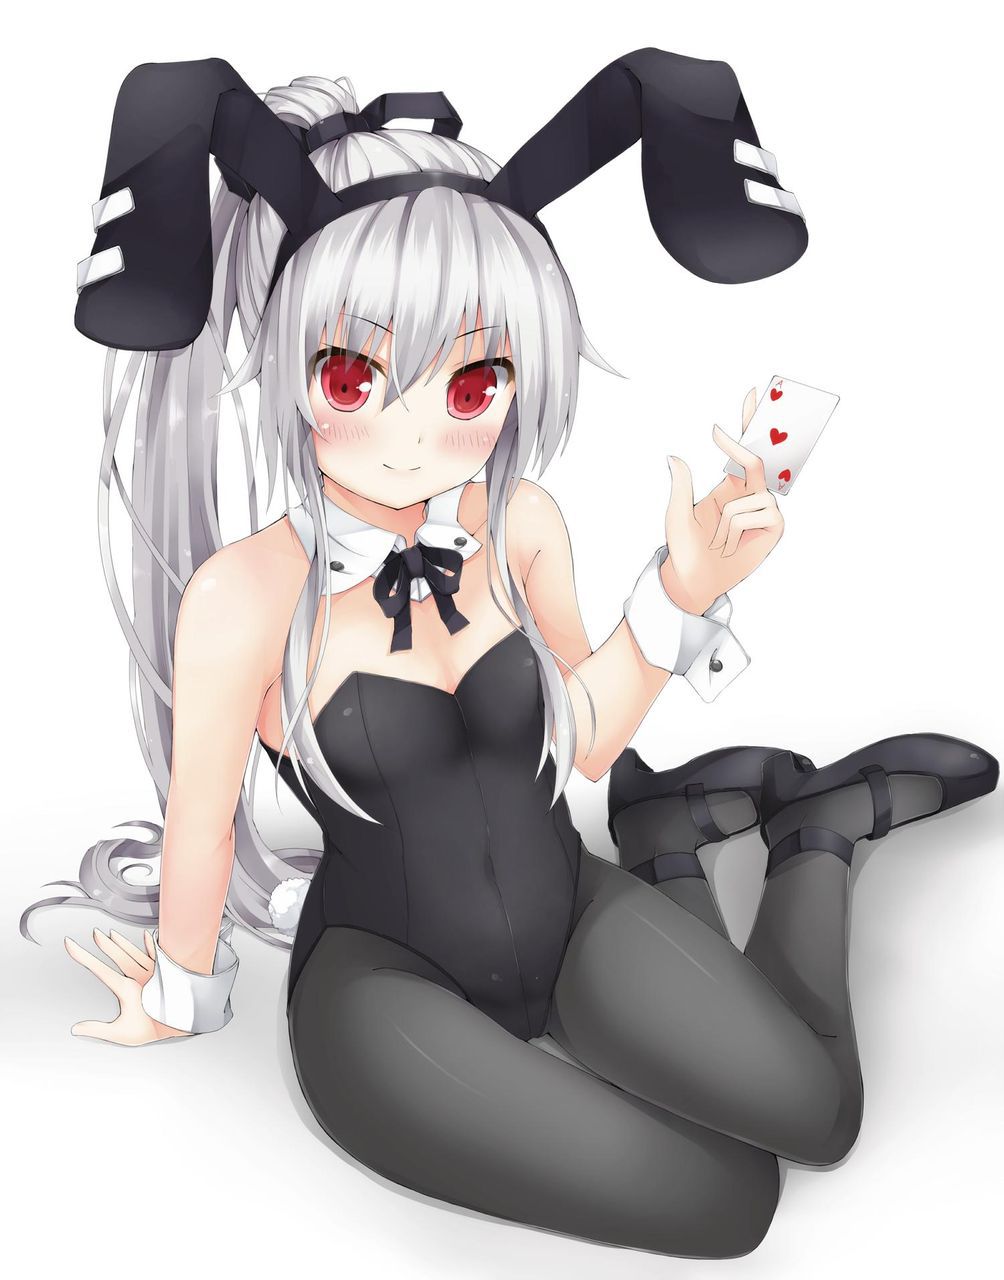 The bunny girl picture of whether you'll meet once in a lifetime real 17